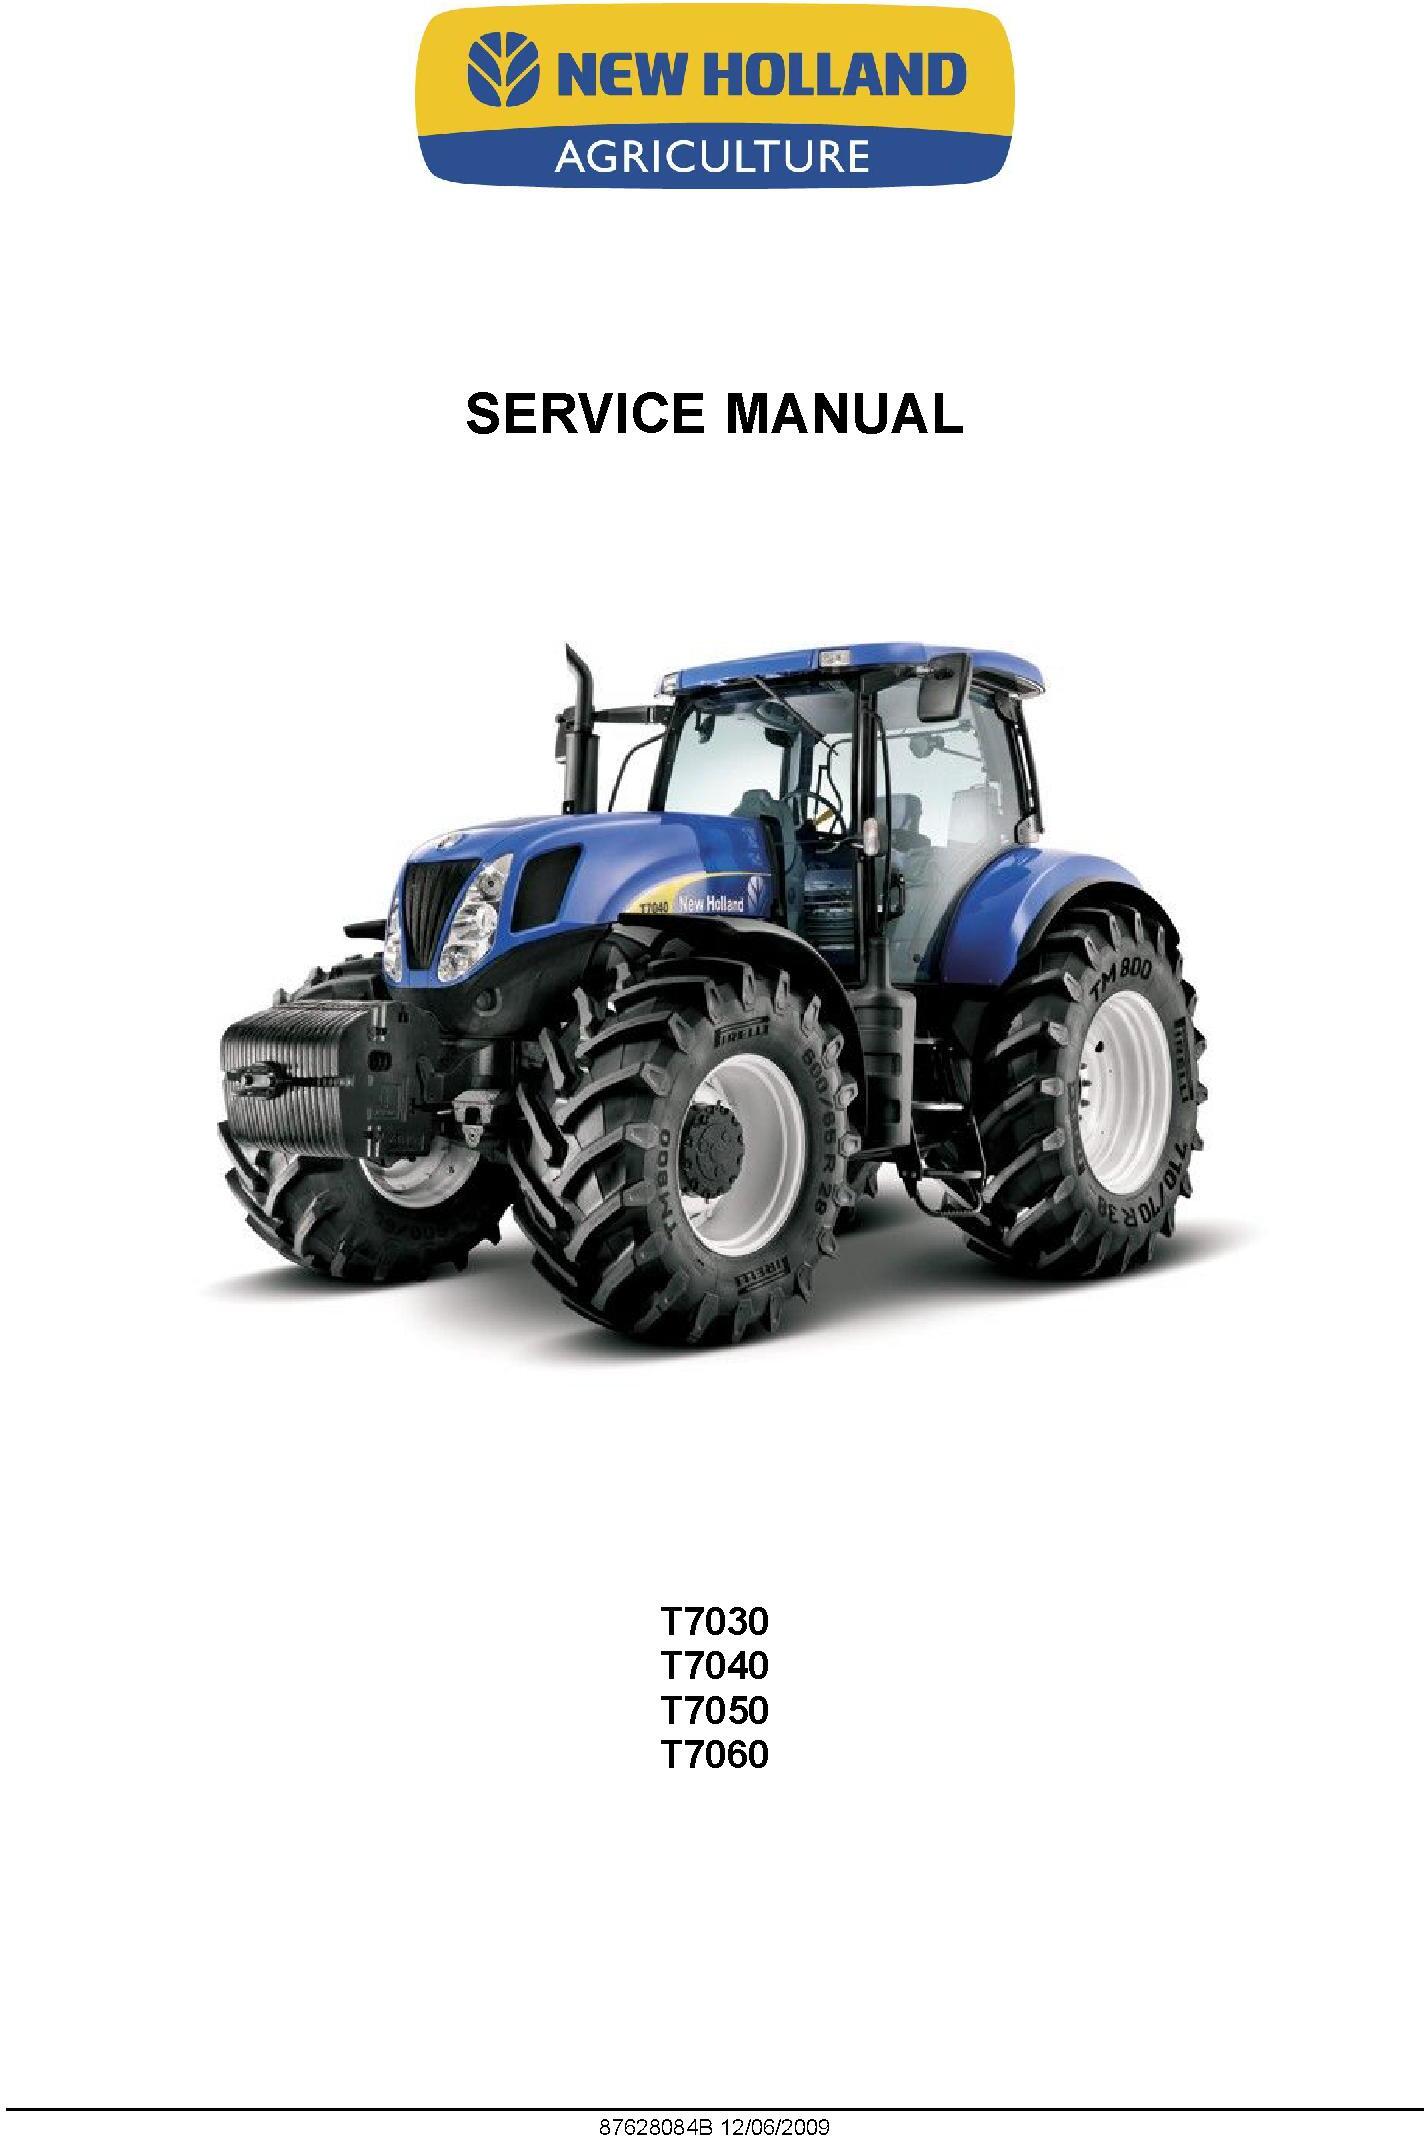 New Holland T7030, T7040, T7050, T7060 Tractor Service Manual - 19625